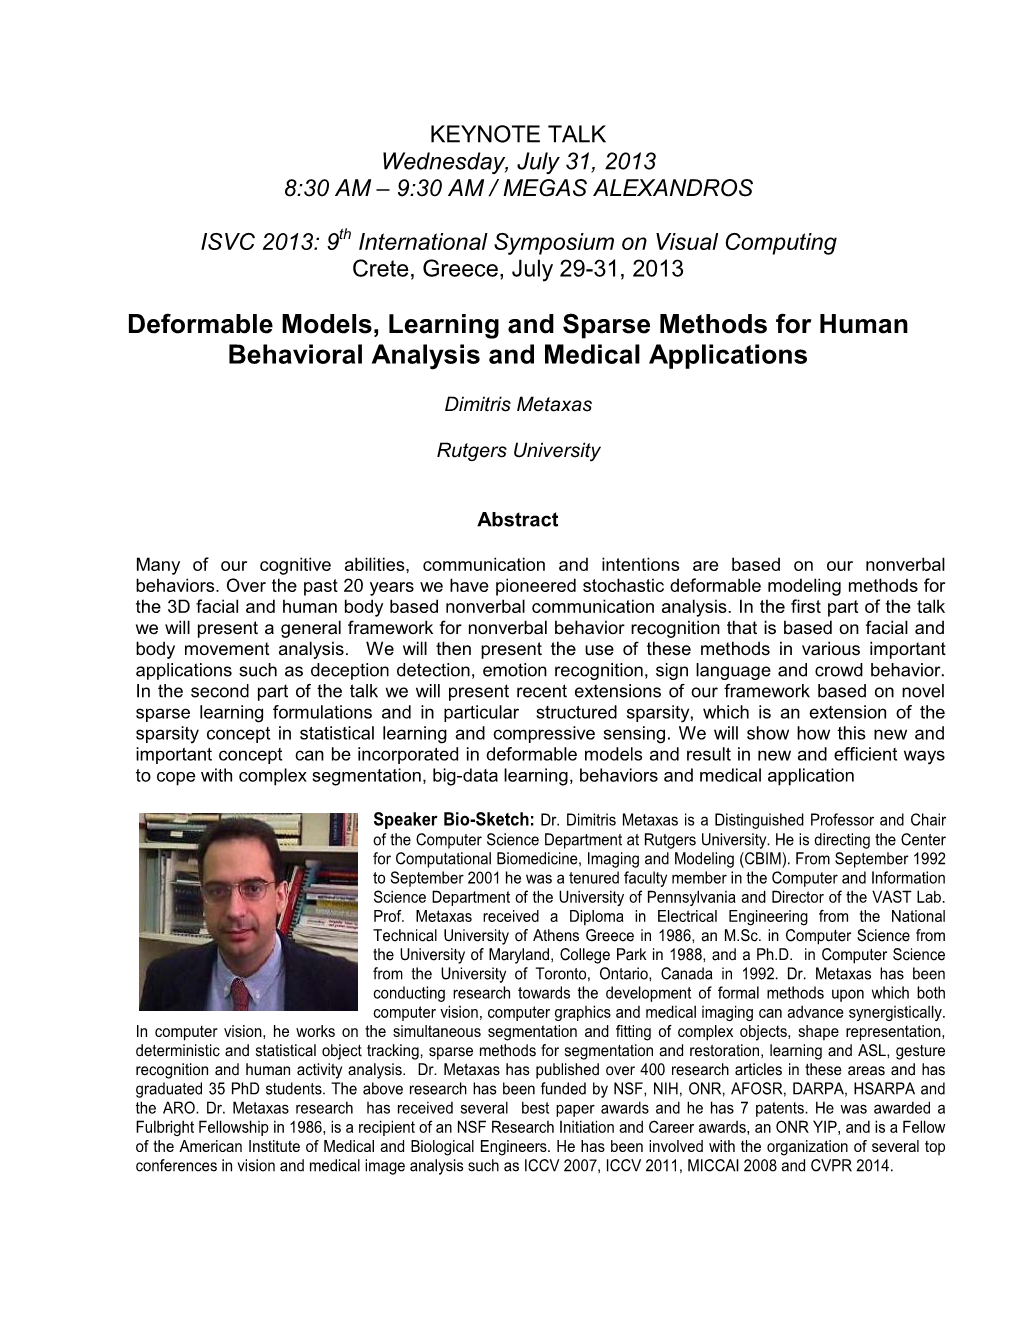 Deformable Models, Learning and Sparse Methods for Human Behavioral Analysis and Medical Applications